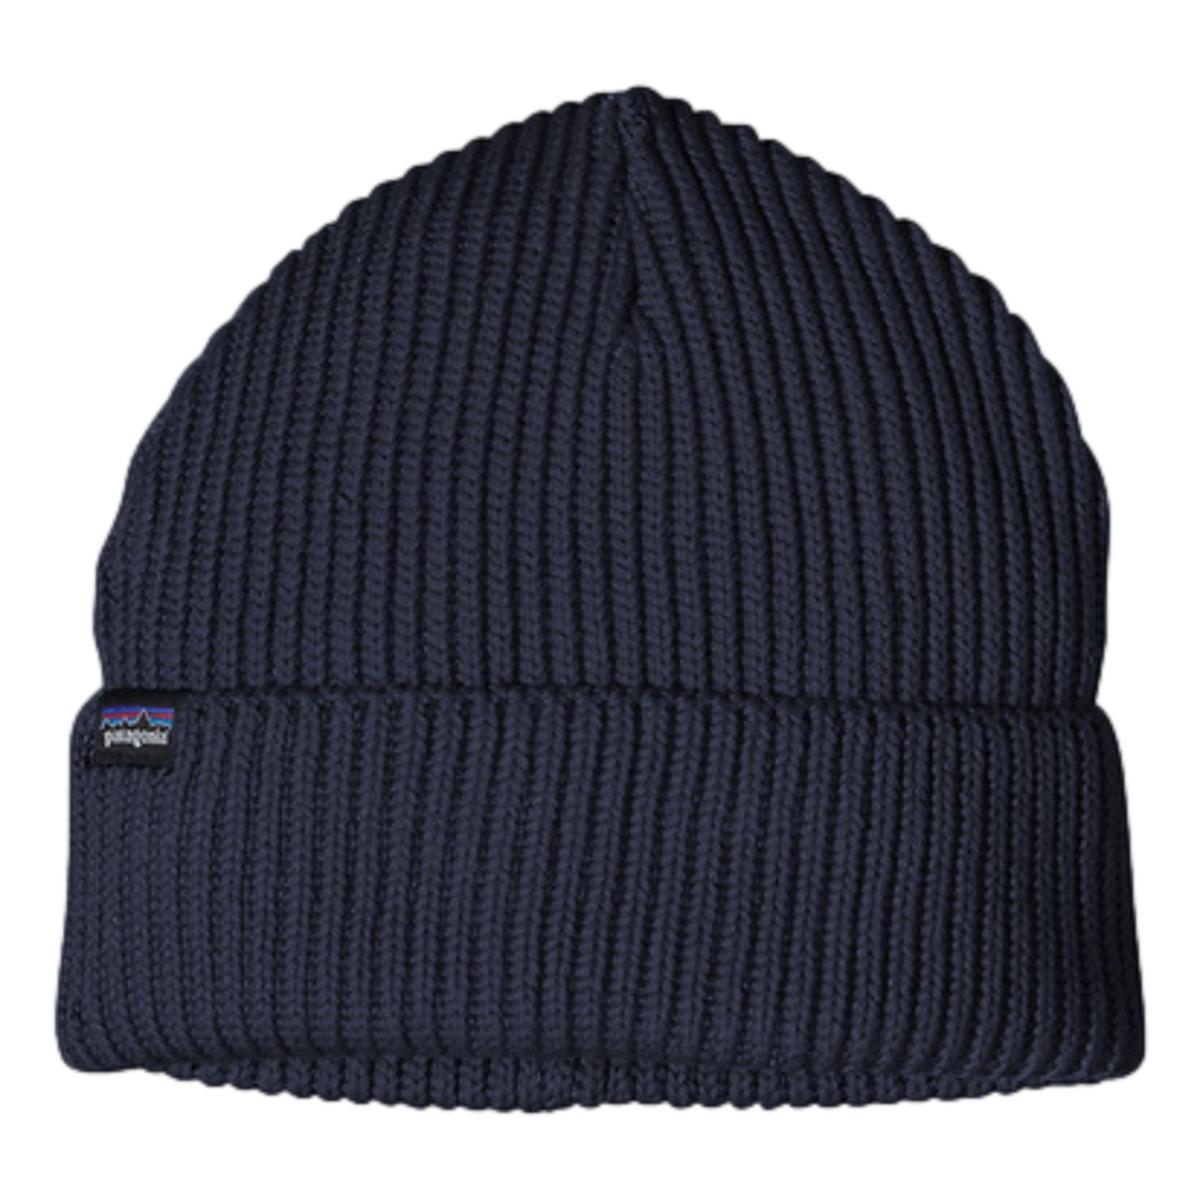 Fisherman’s Rolled Navy Blue - Hat